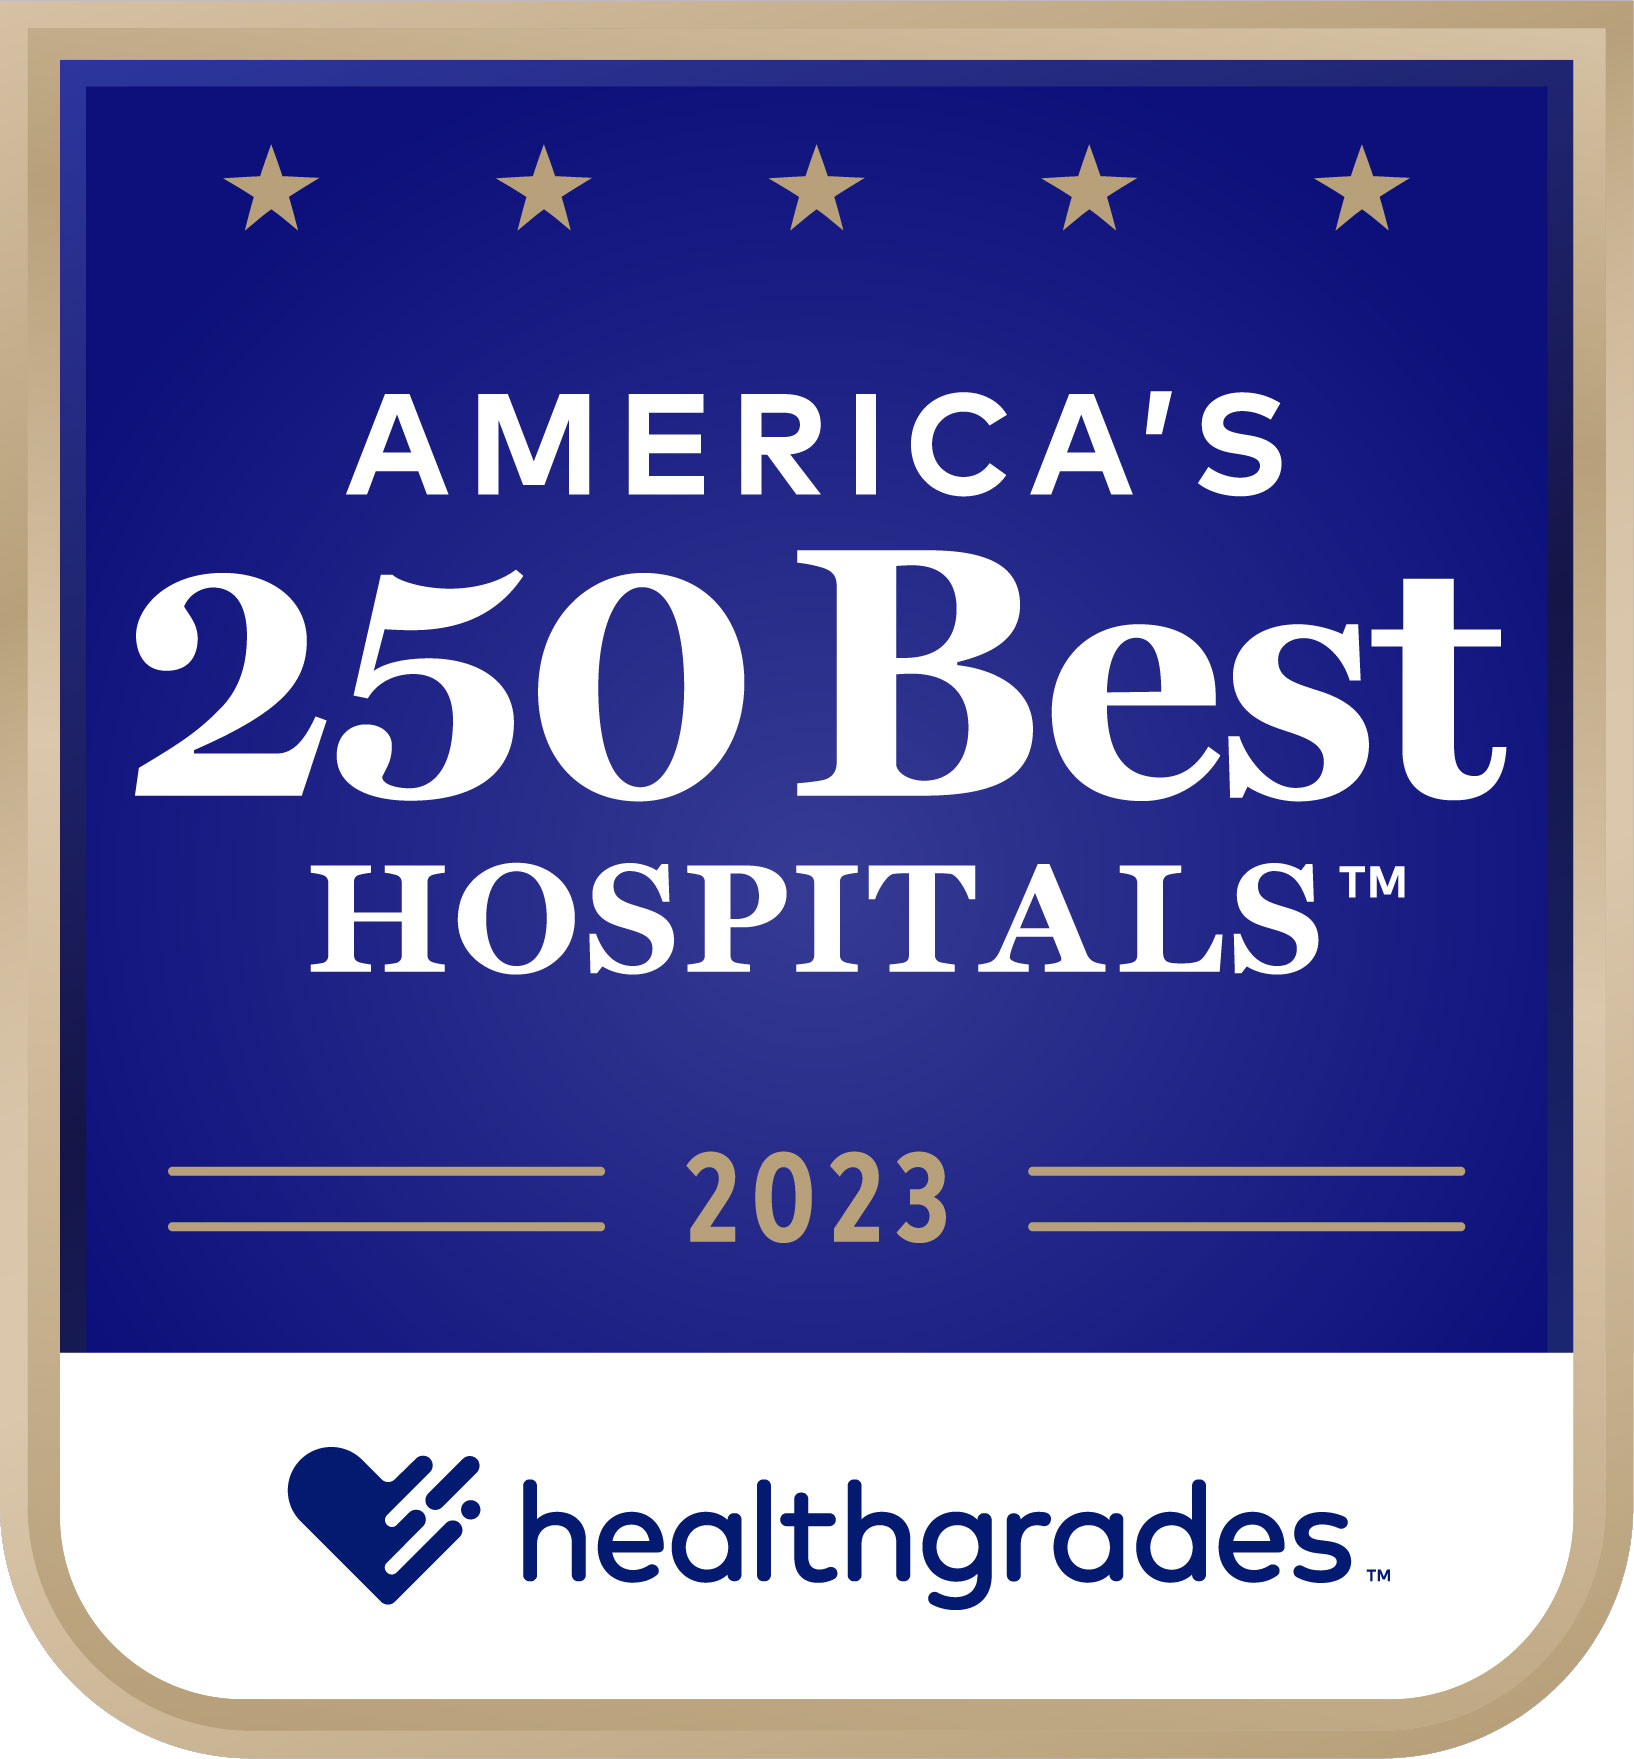 America's 250 Best Hospitals - 2023 by Healthgrades